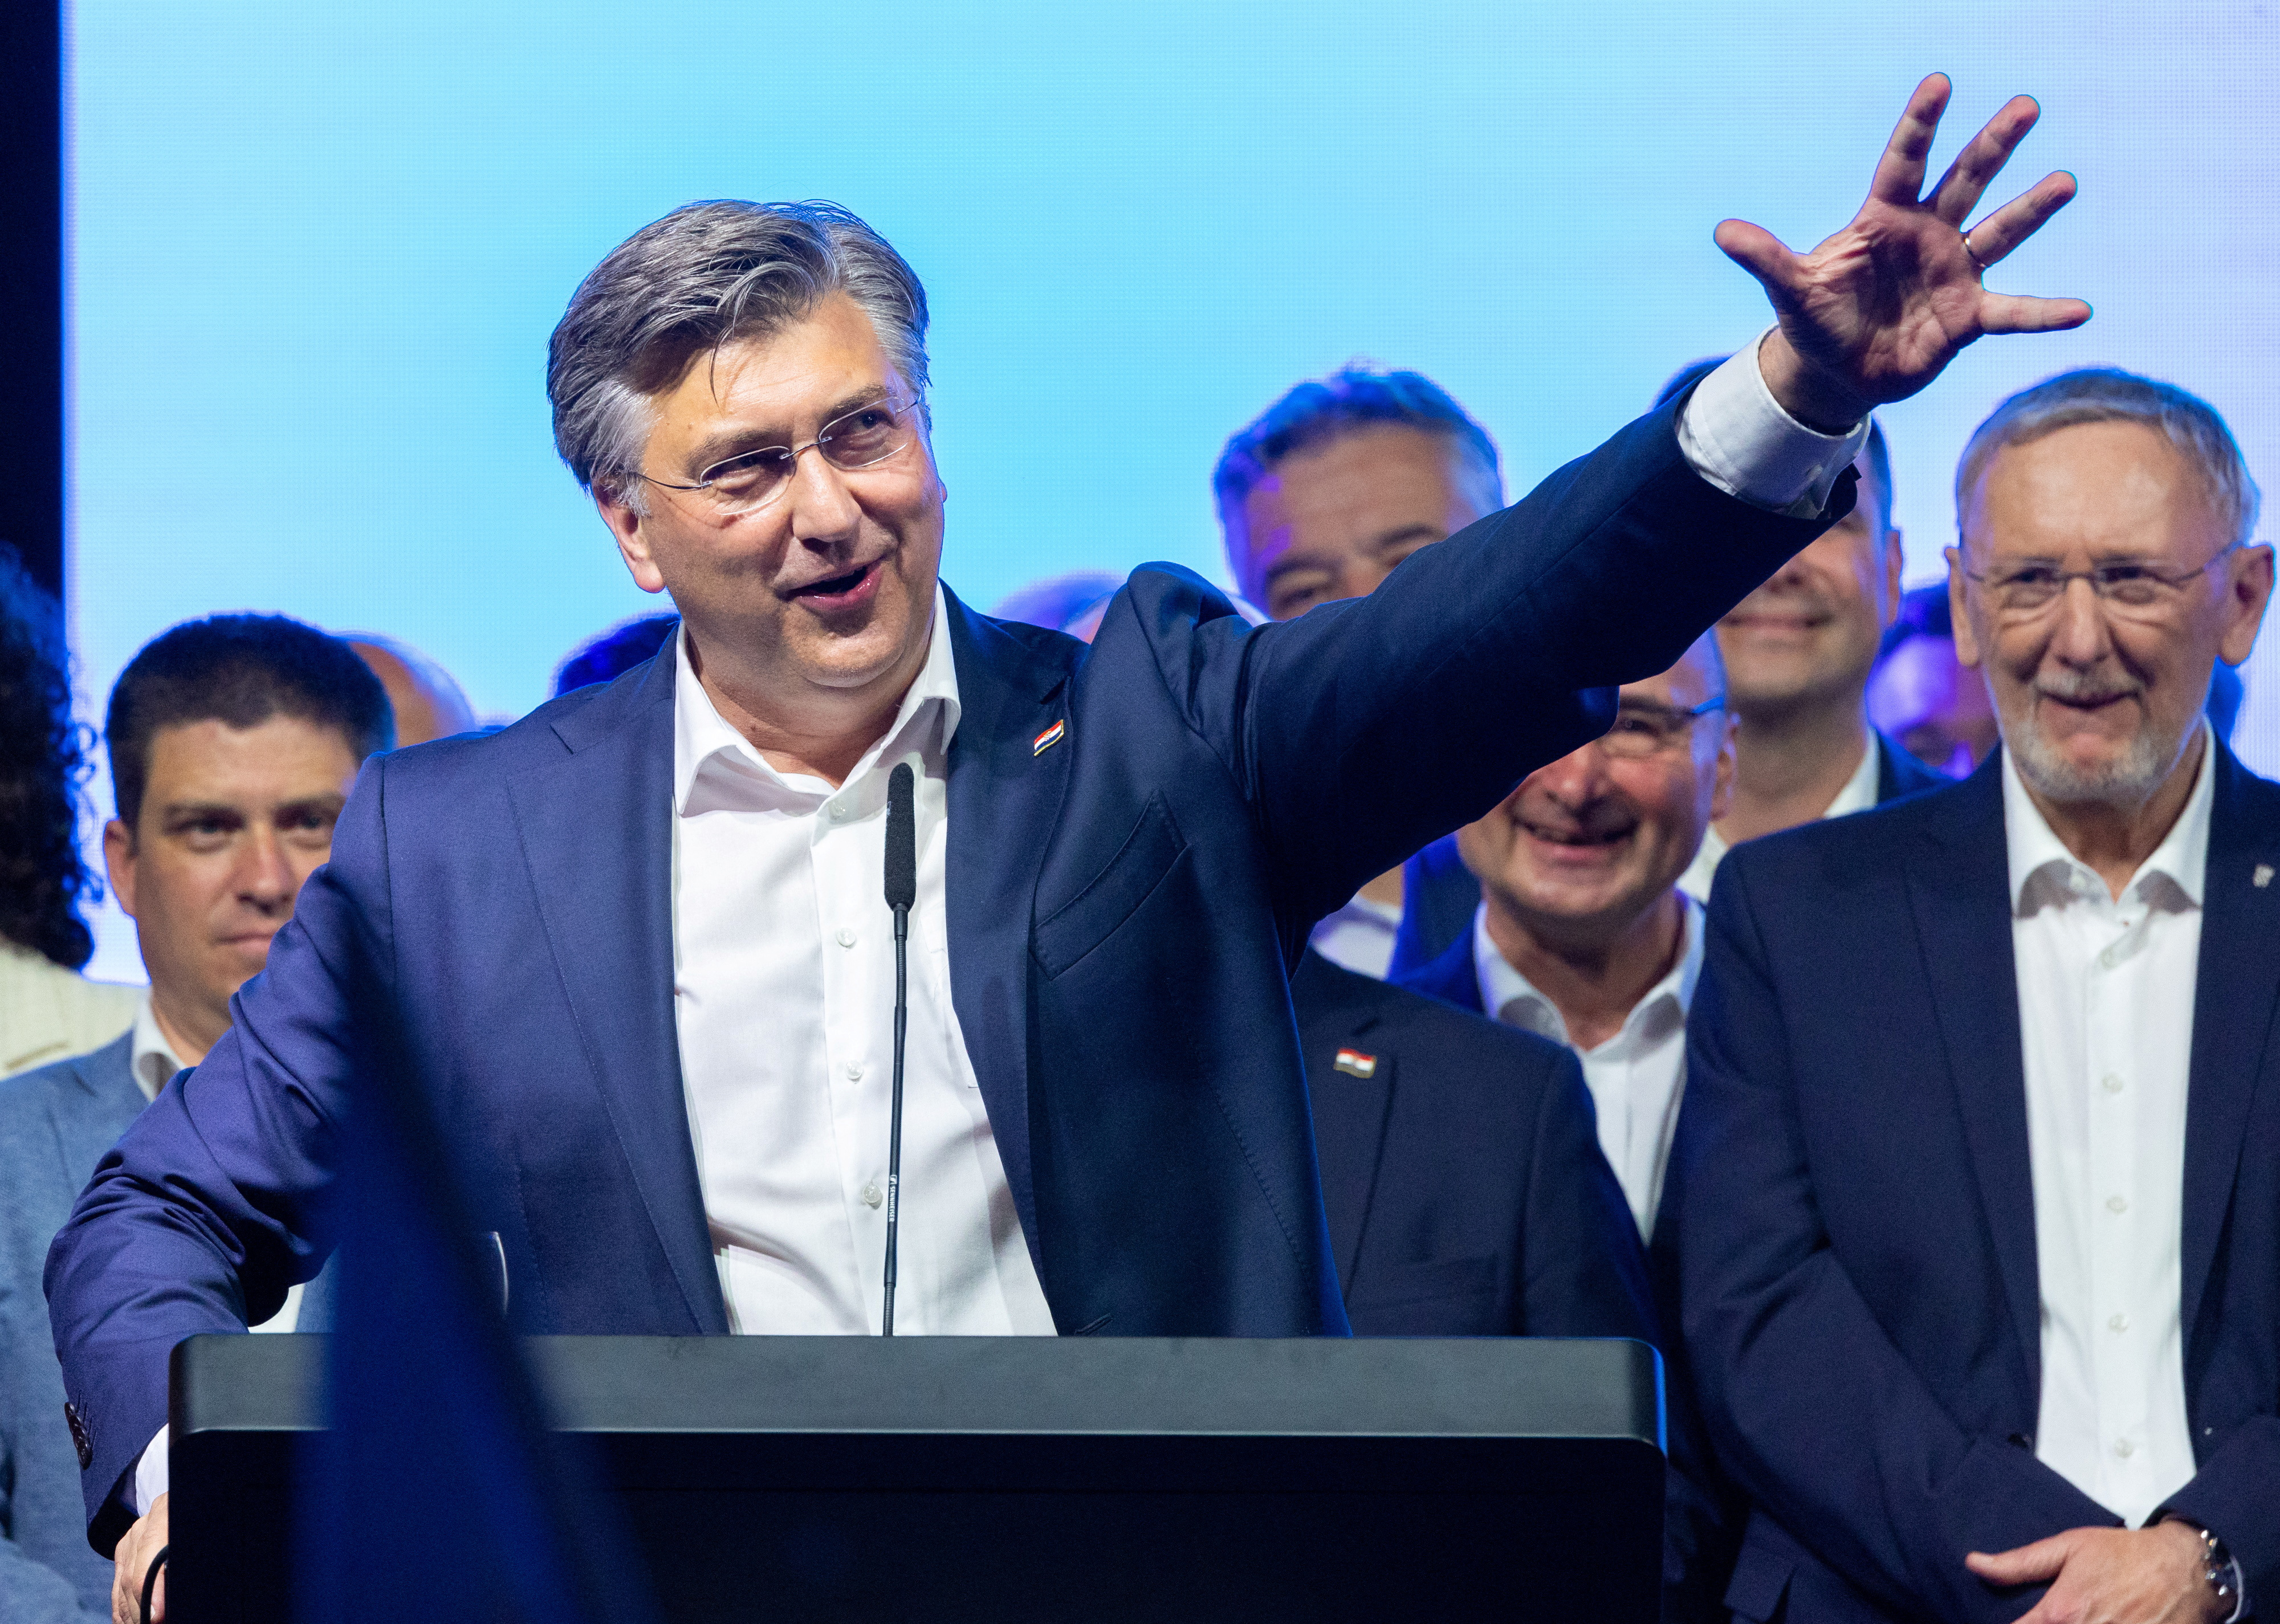 Croatian Prime Minister and Croatian Democratic Union (HDZ) party chief Andrej Plenkovic attends an election rally in Zagreb